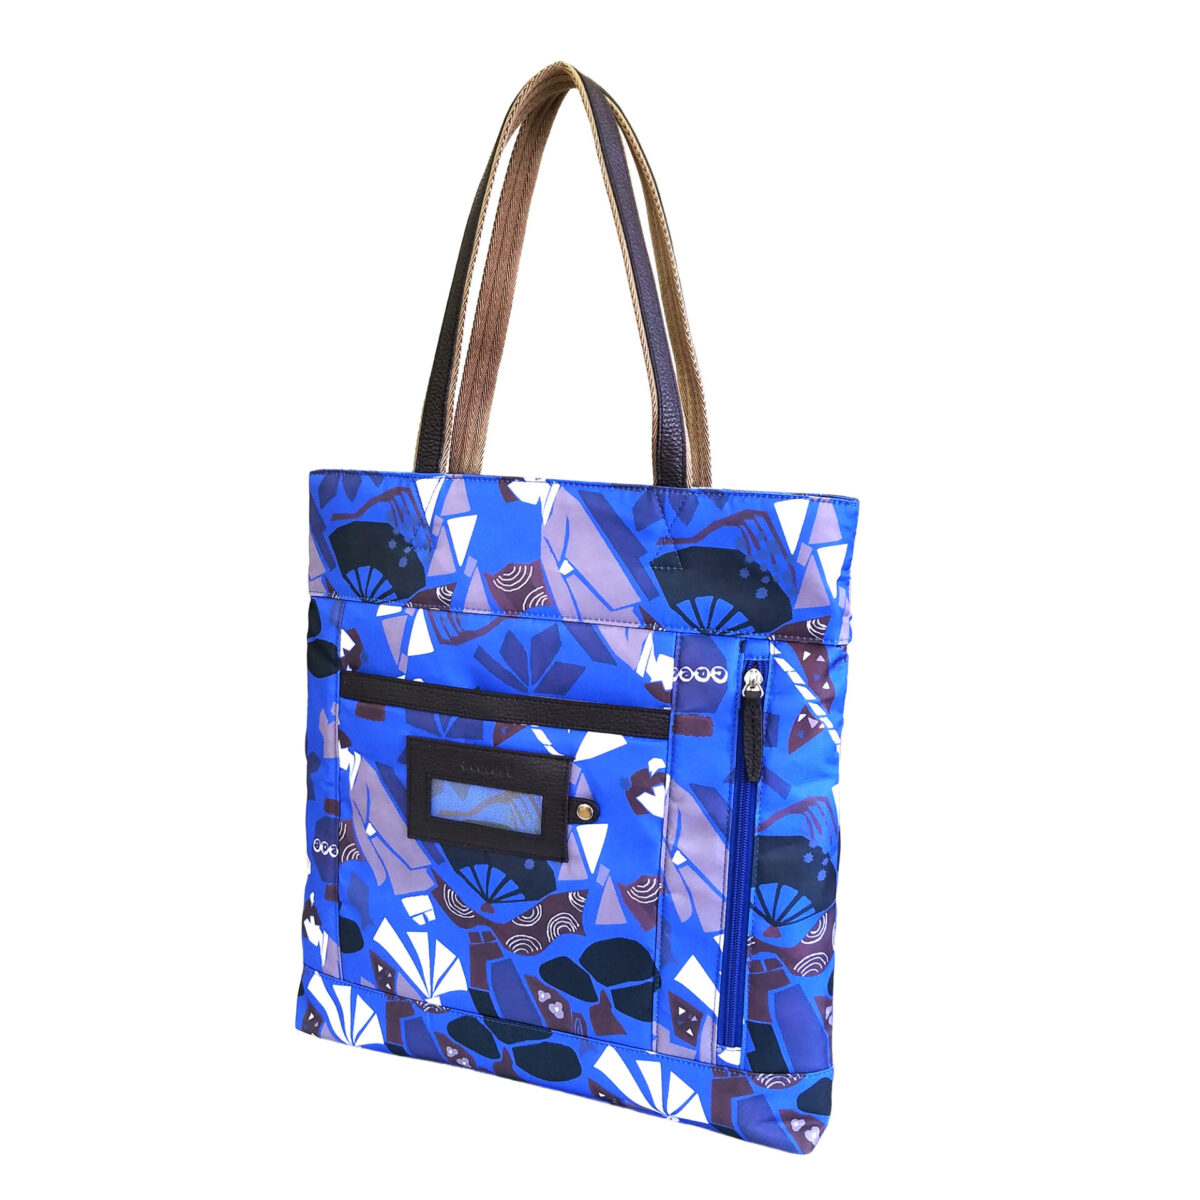 Maiko Puzzle Etna tote blue